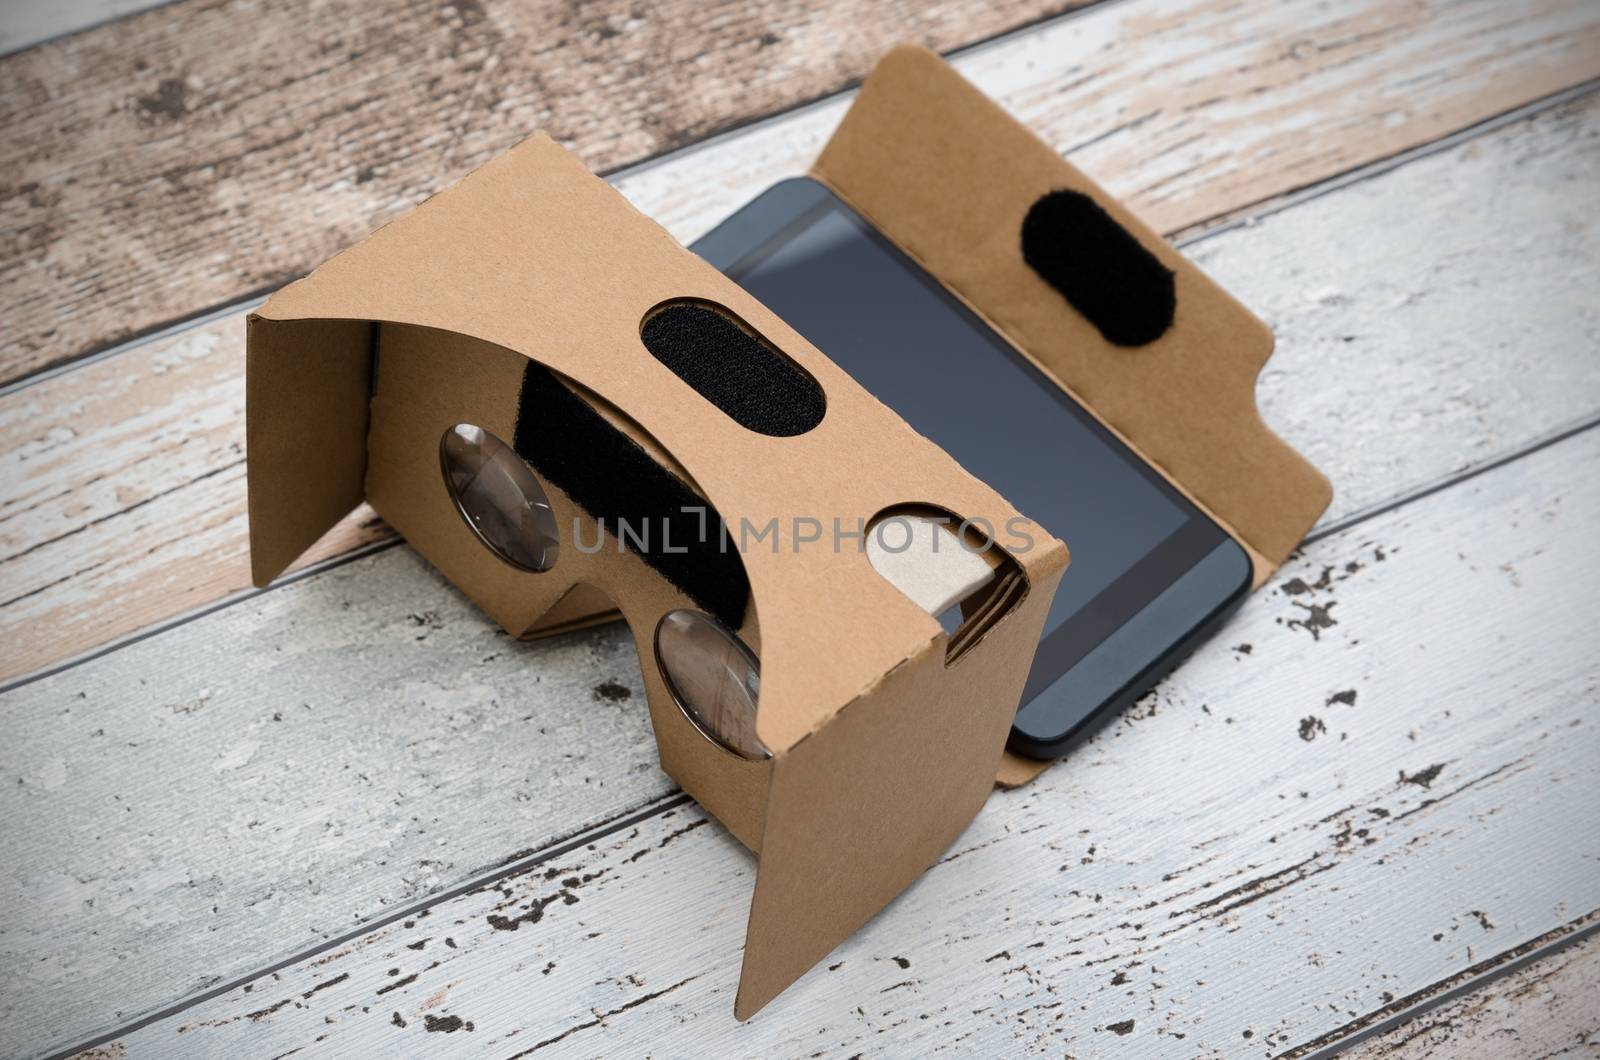 Virtual reality cardboard glasses. Easy way to watch movies in 3 by simpson33